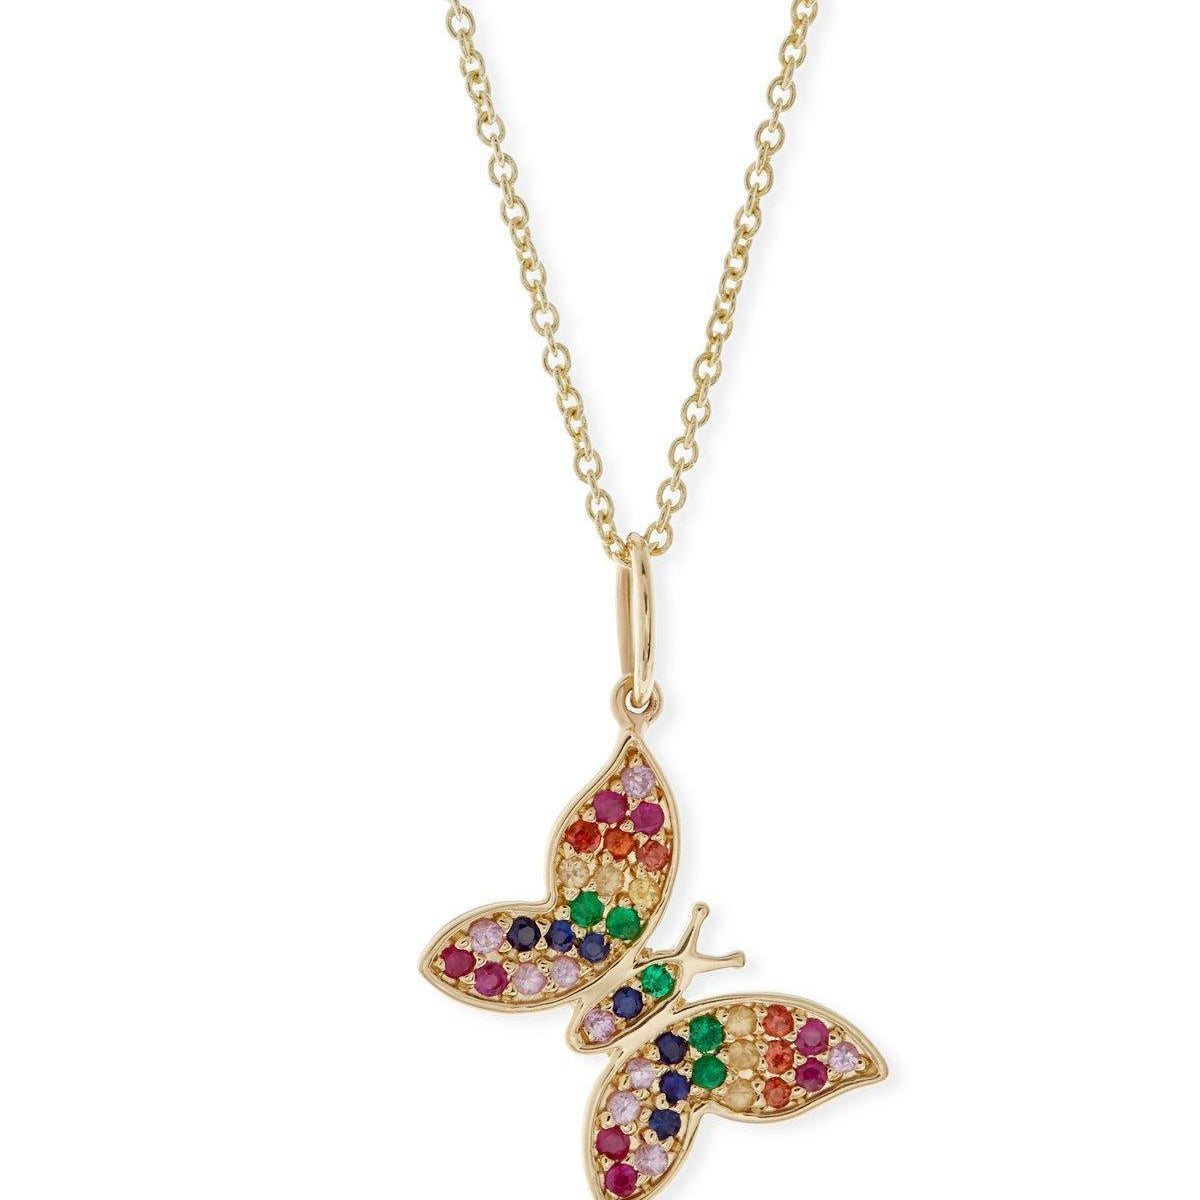 Women's Jewelry - Necklaces Rainbow Elements Pendant Necklaces 14K Gold Plated Butterfly Bar